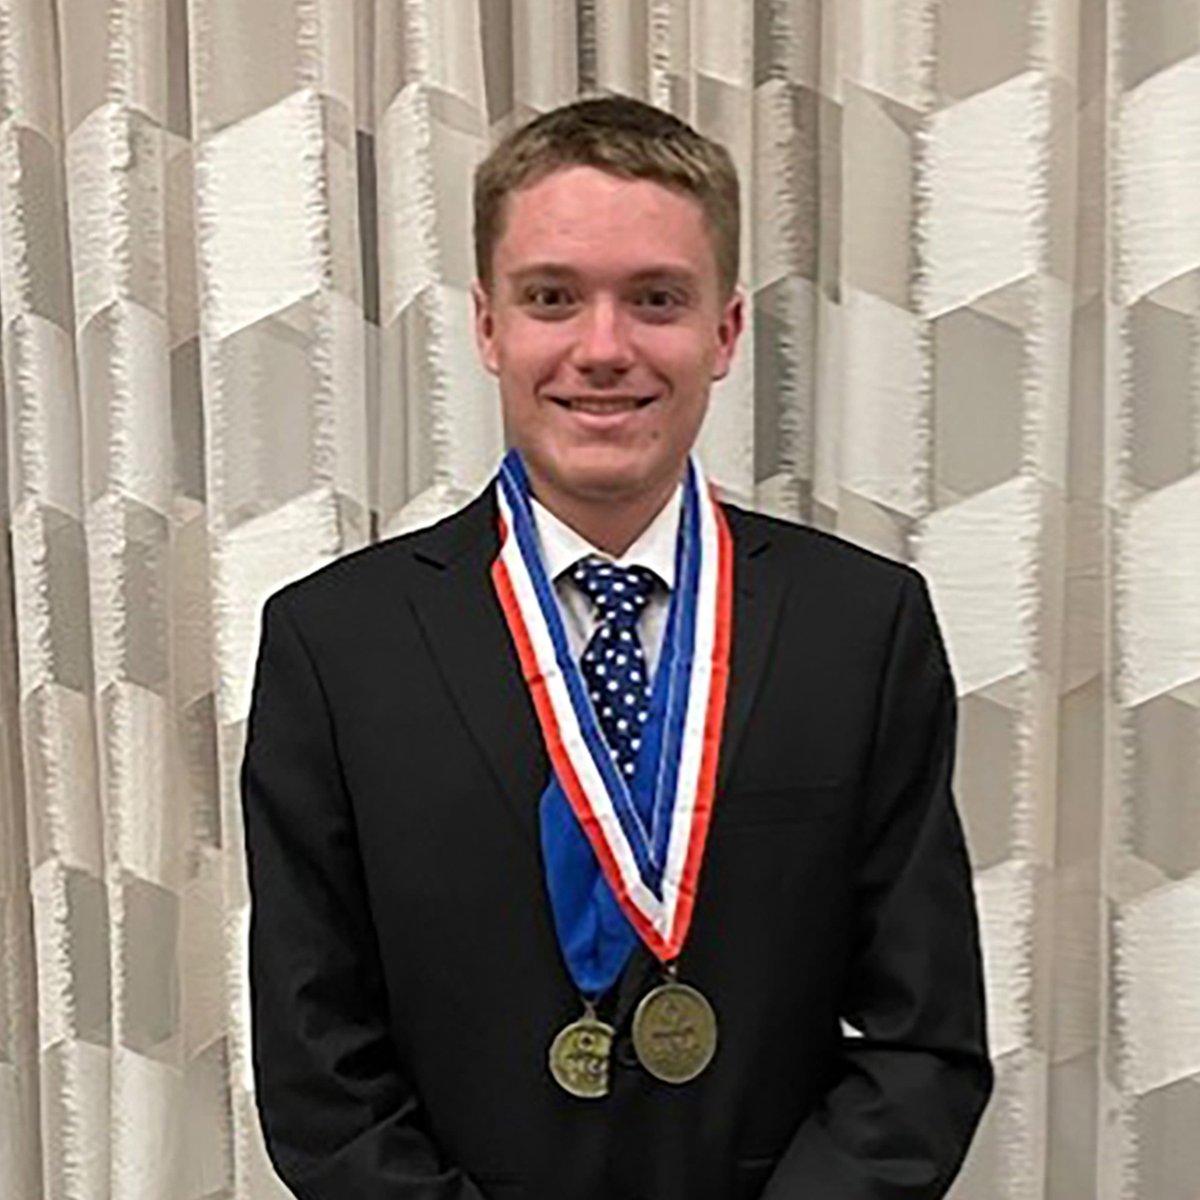 Conner Lea, of the Collegiate DECA student club, received a top qualifier medal at the International Career Development Conference (ICDC) in Austin, Texas and went on to compete in the final round of the competition. Congratulations, Conner! 🎉 #TheDeltaWay